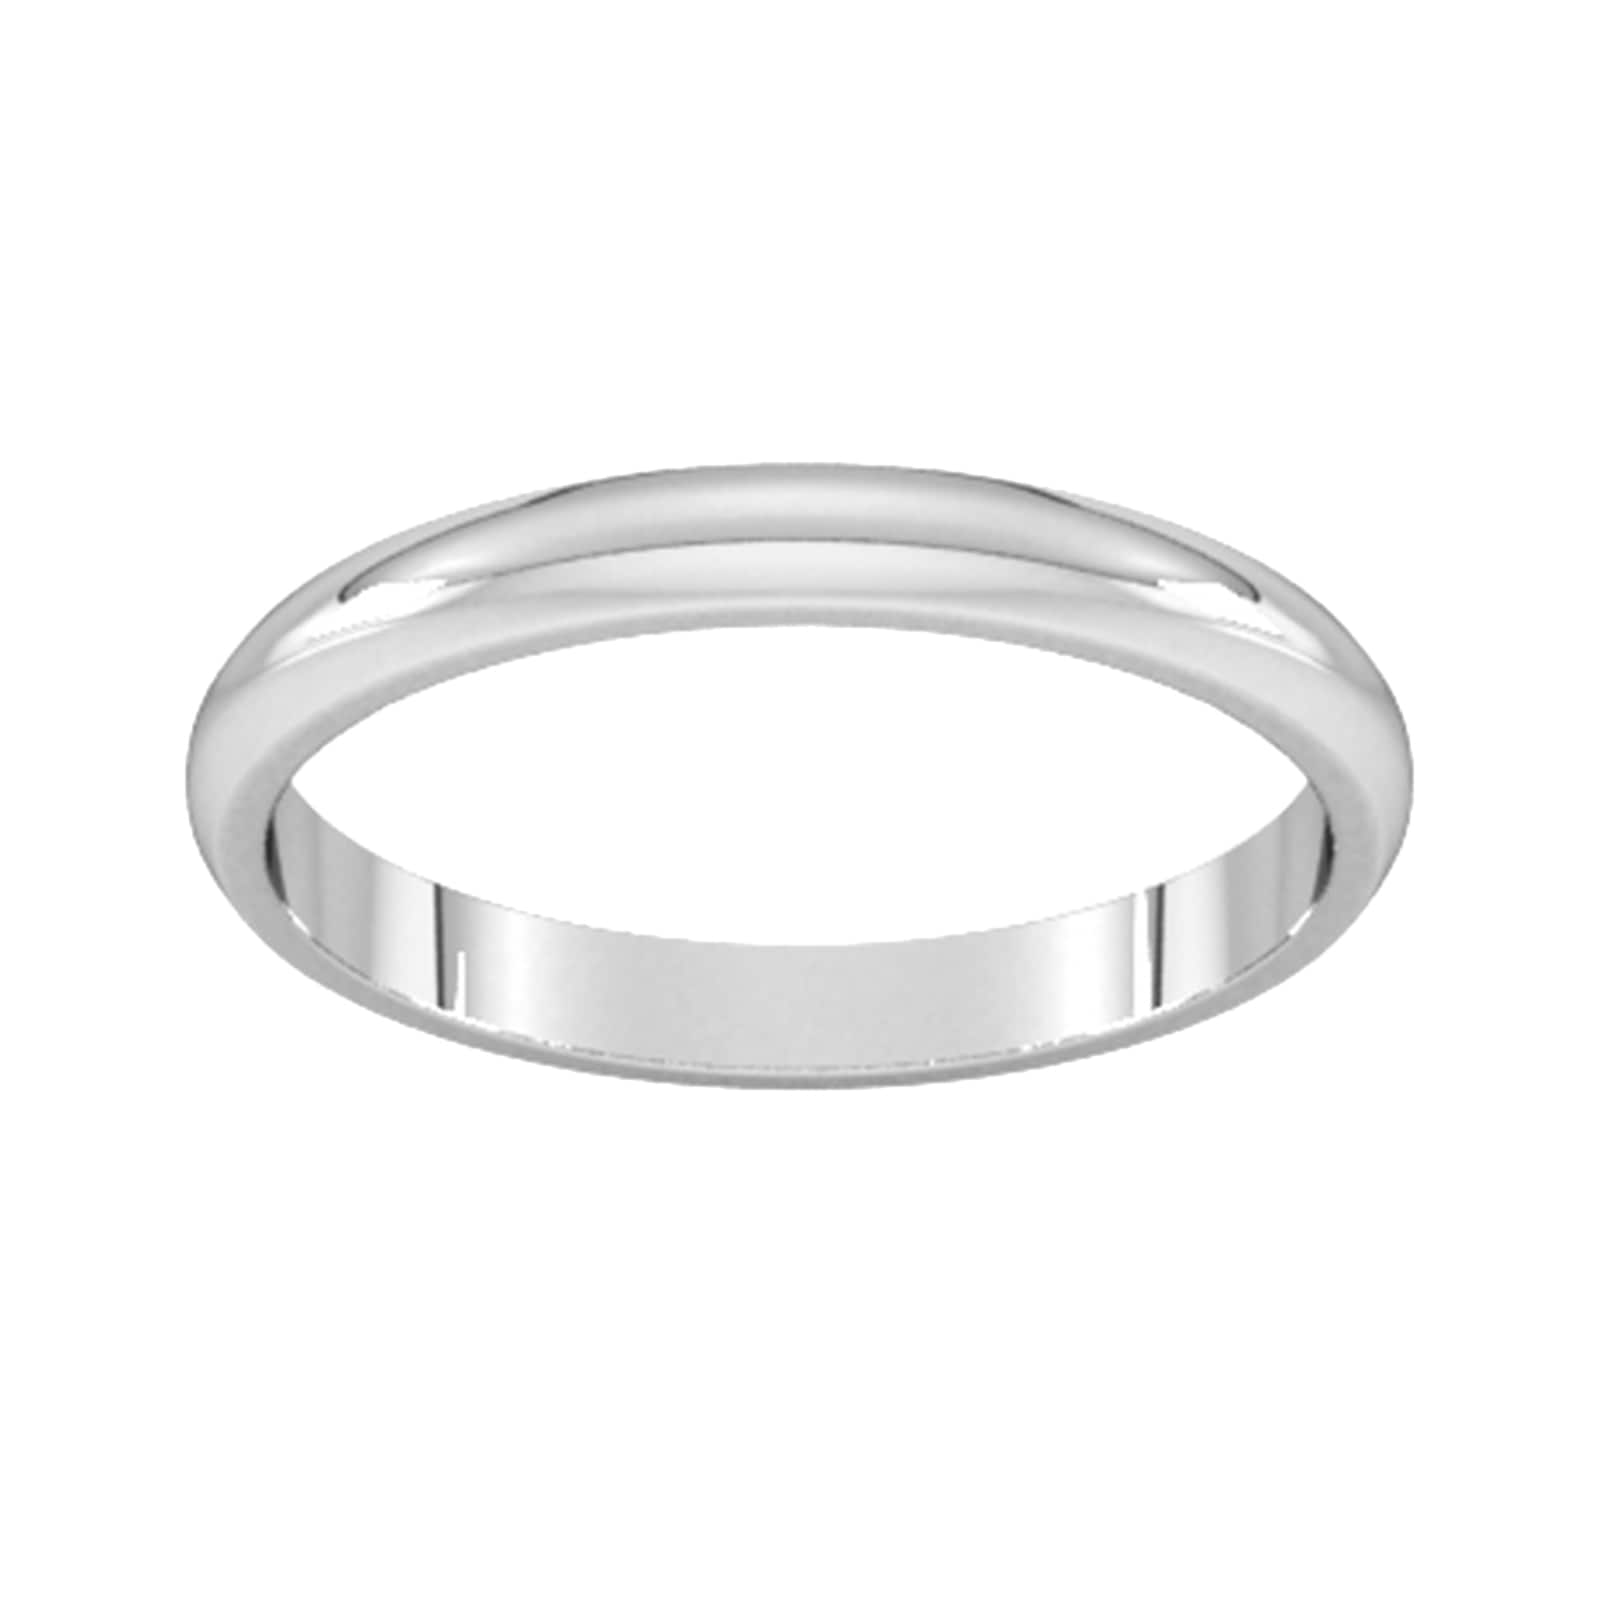 2.5mm D Shape Standard Wedding Ring In 18 Carat White Gold - Ring Size L